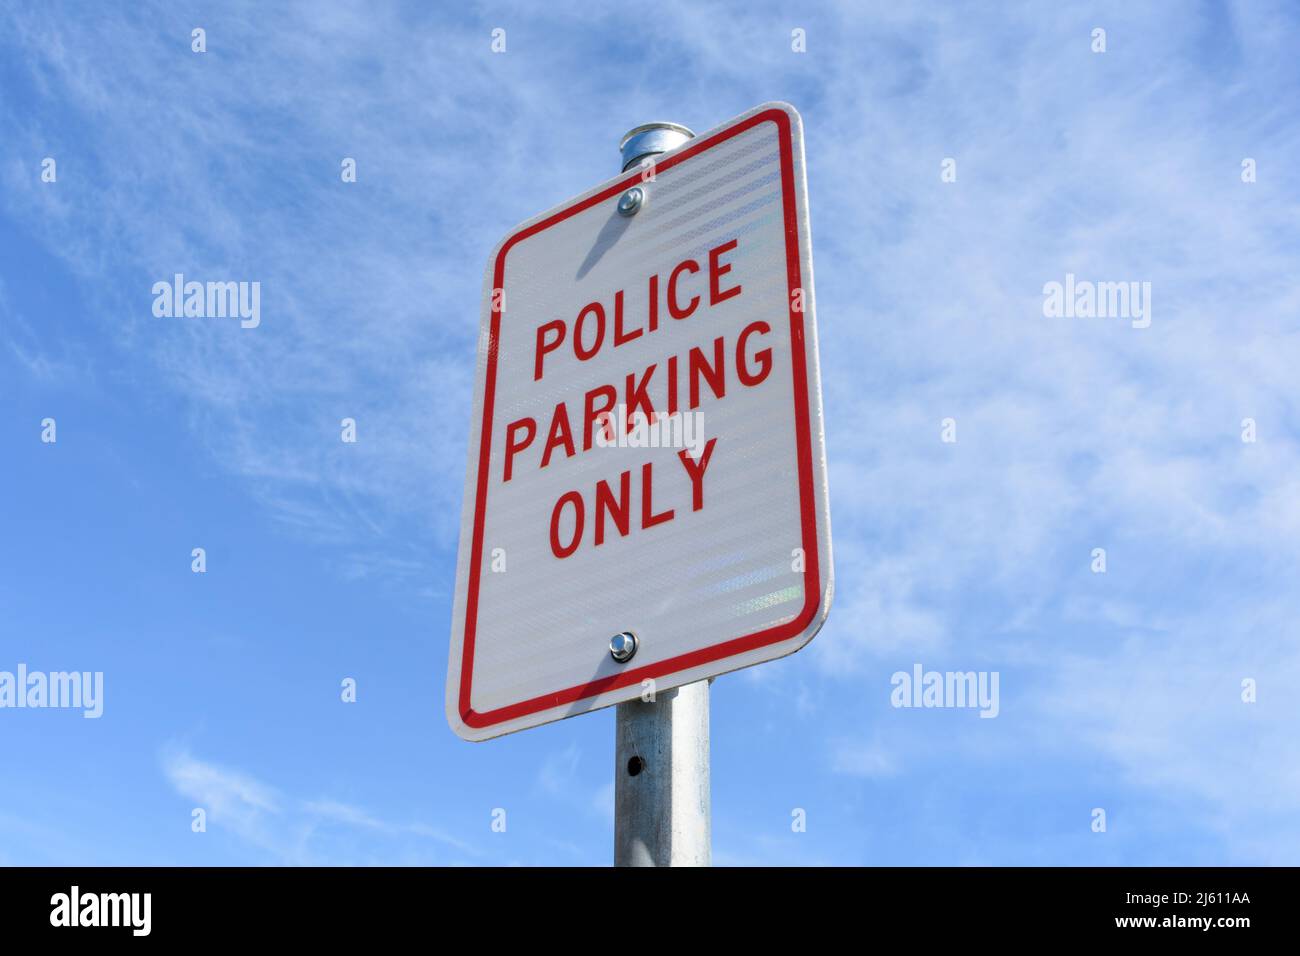 Police Parking Only road sign on pole against blue sky. Stock Photo